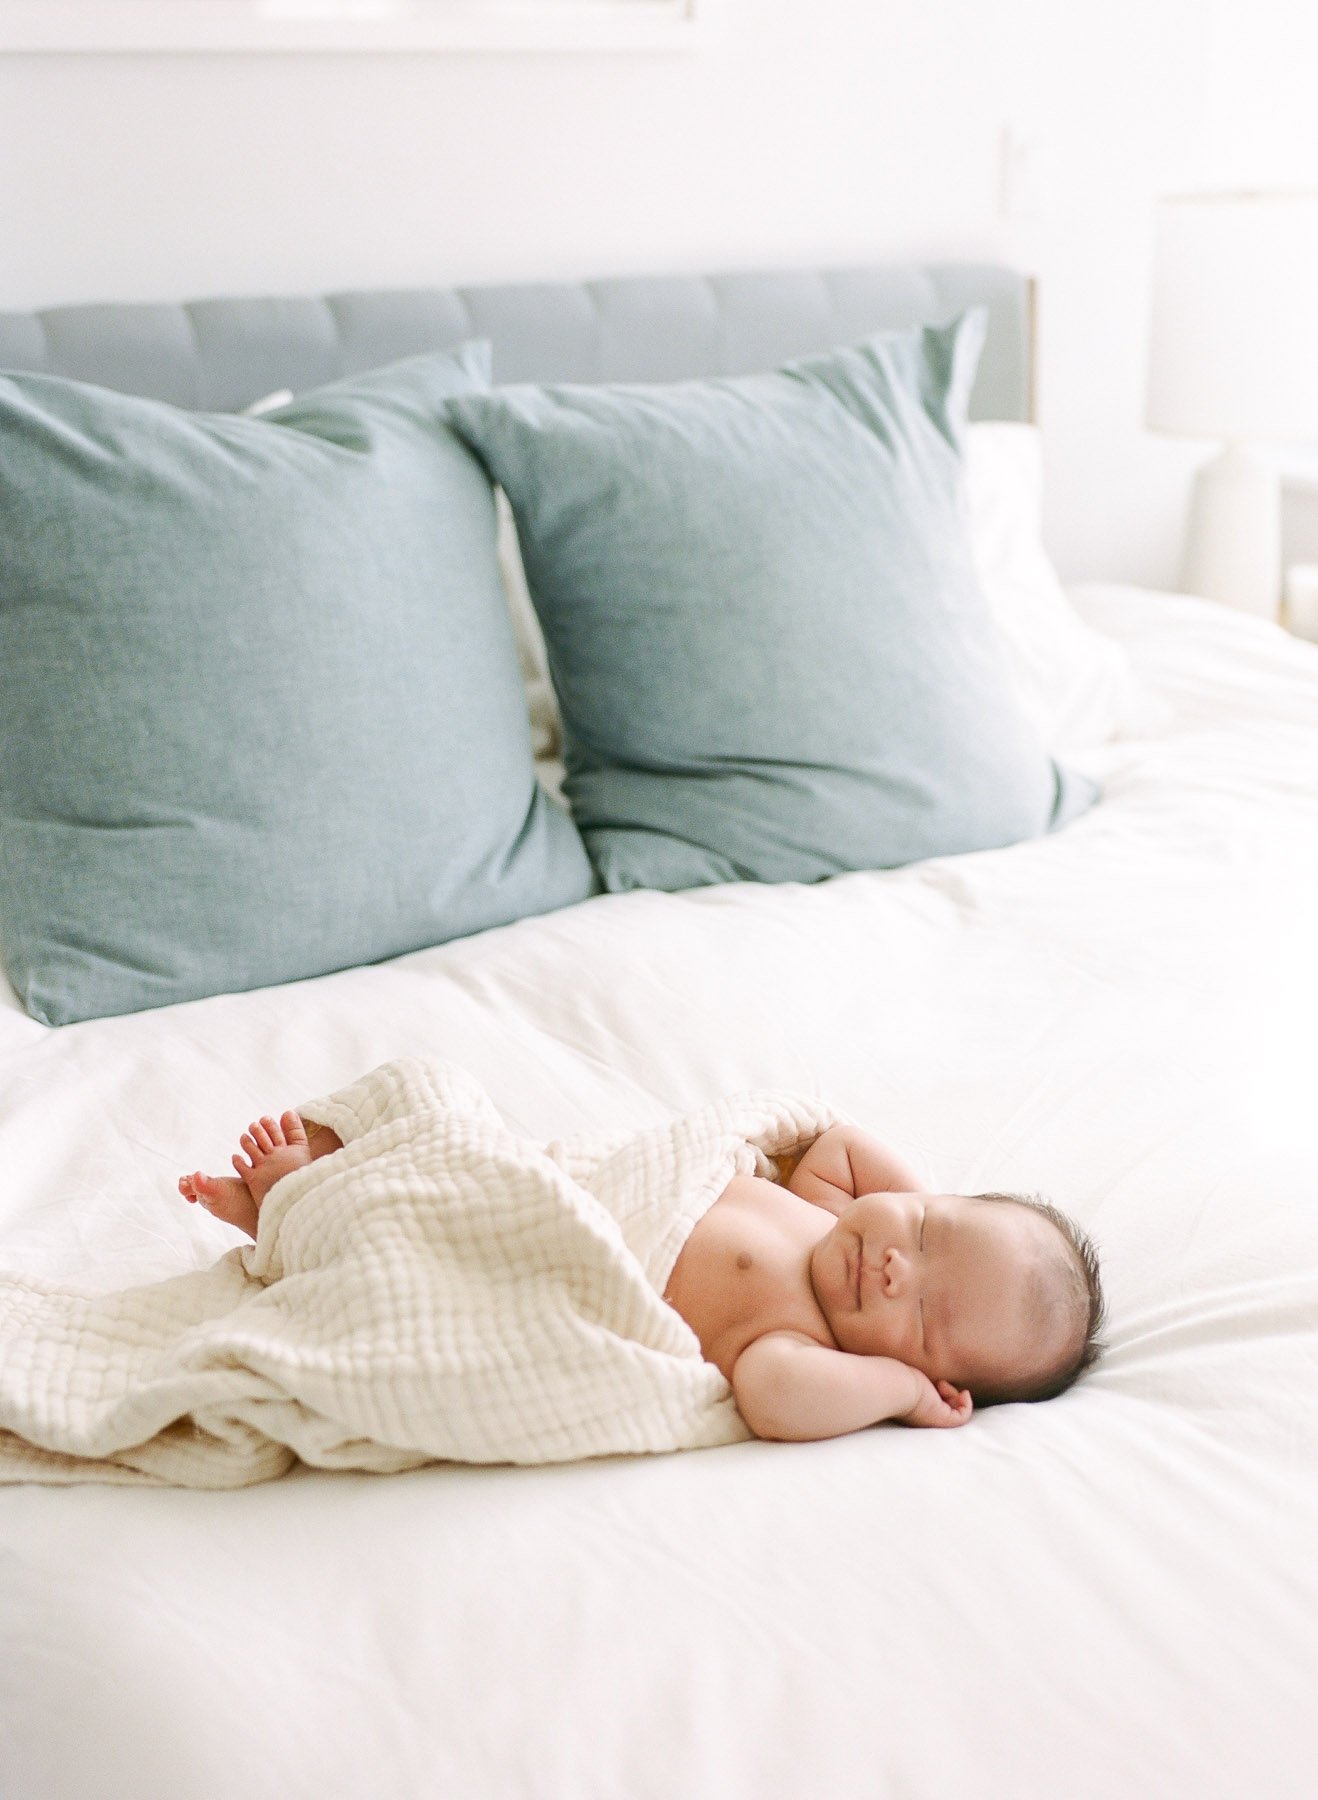 NYC Newborn Photography by Michelle Lange Photography-47.jpg